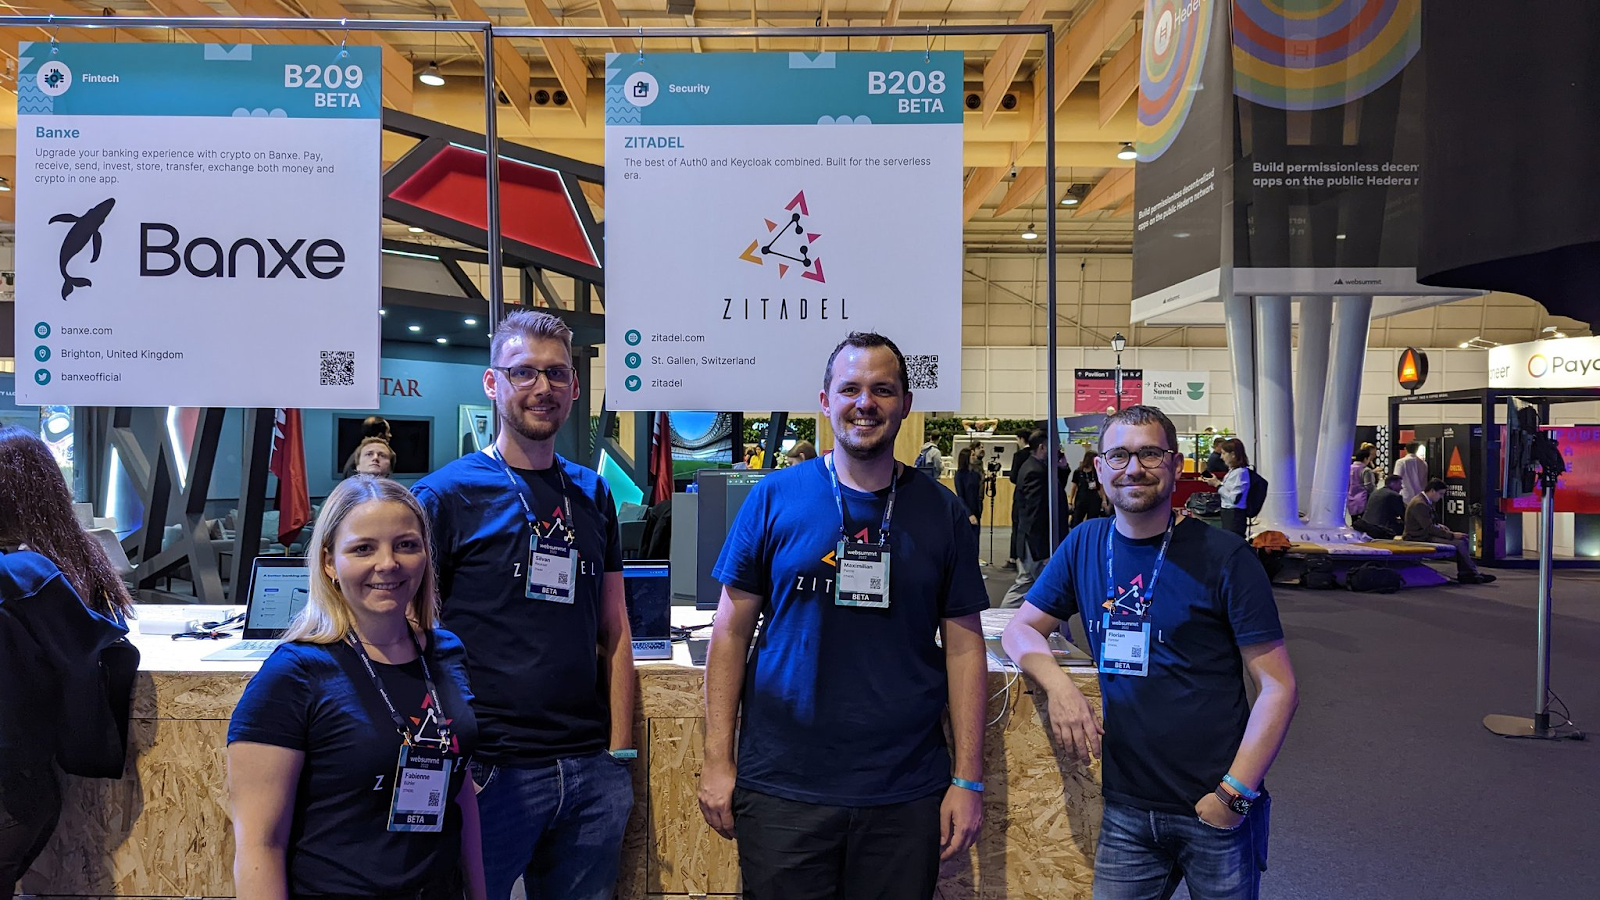 Fabienne, Silvan, Max, and Florian in front of our ZITADEL booth at Websummit